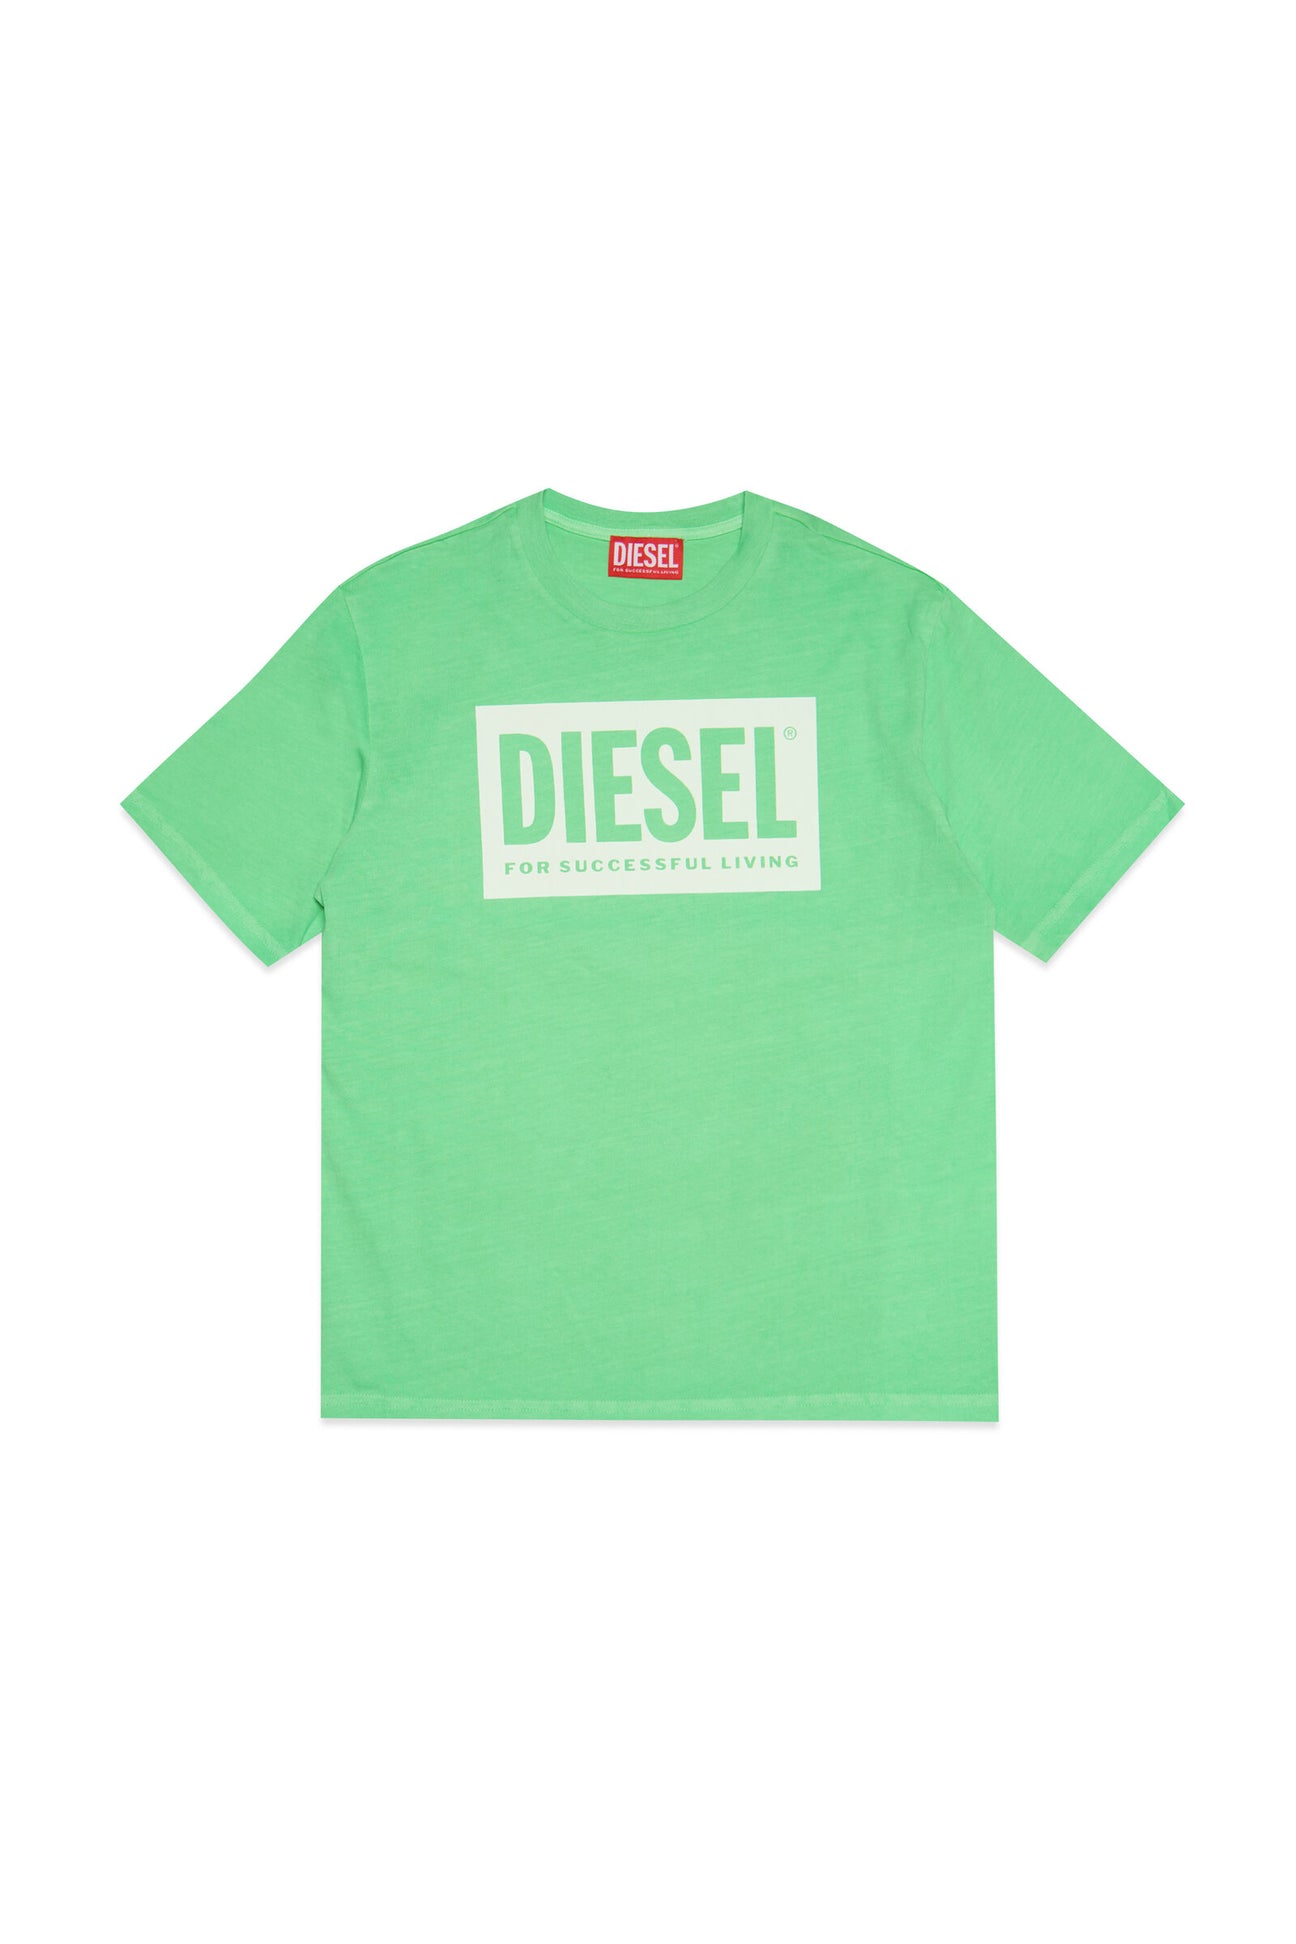 Fluorescent green T-shirt in jersey with logo Fluorescent green T-shirt in jersey with logo